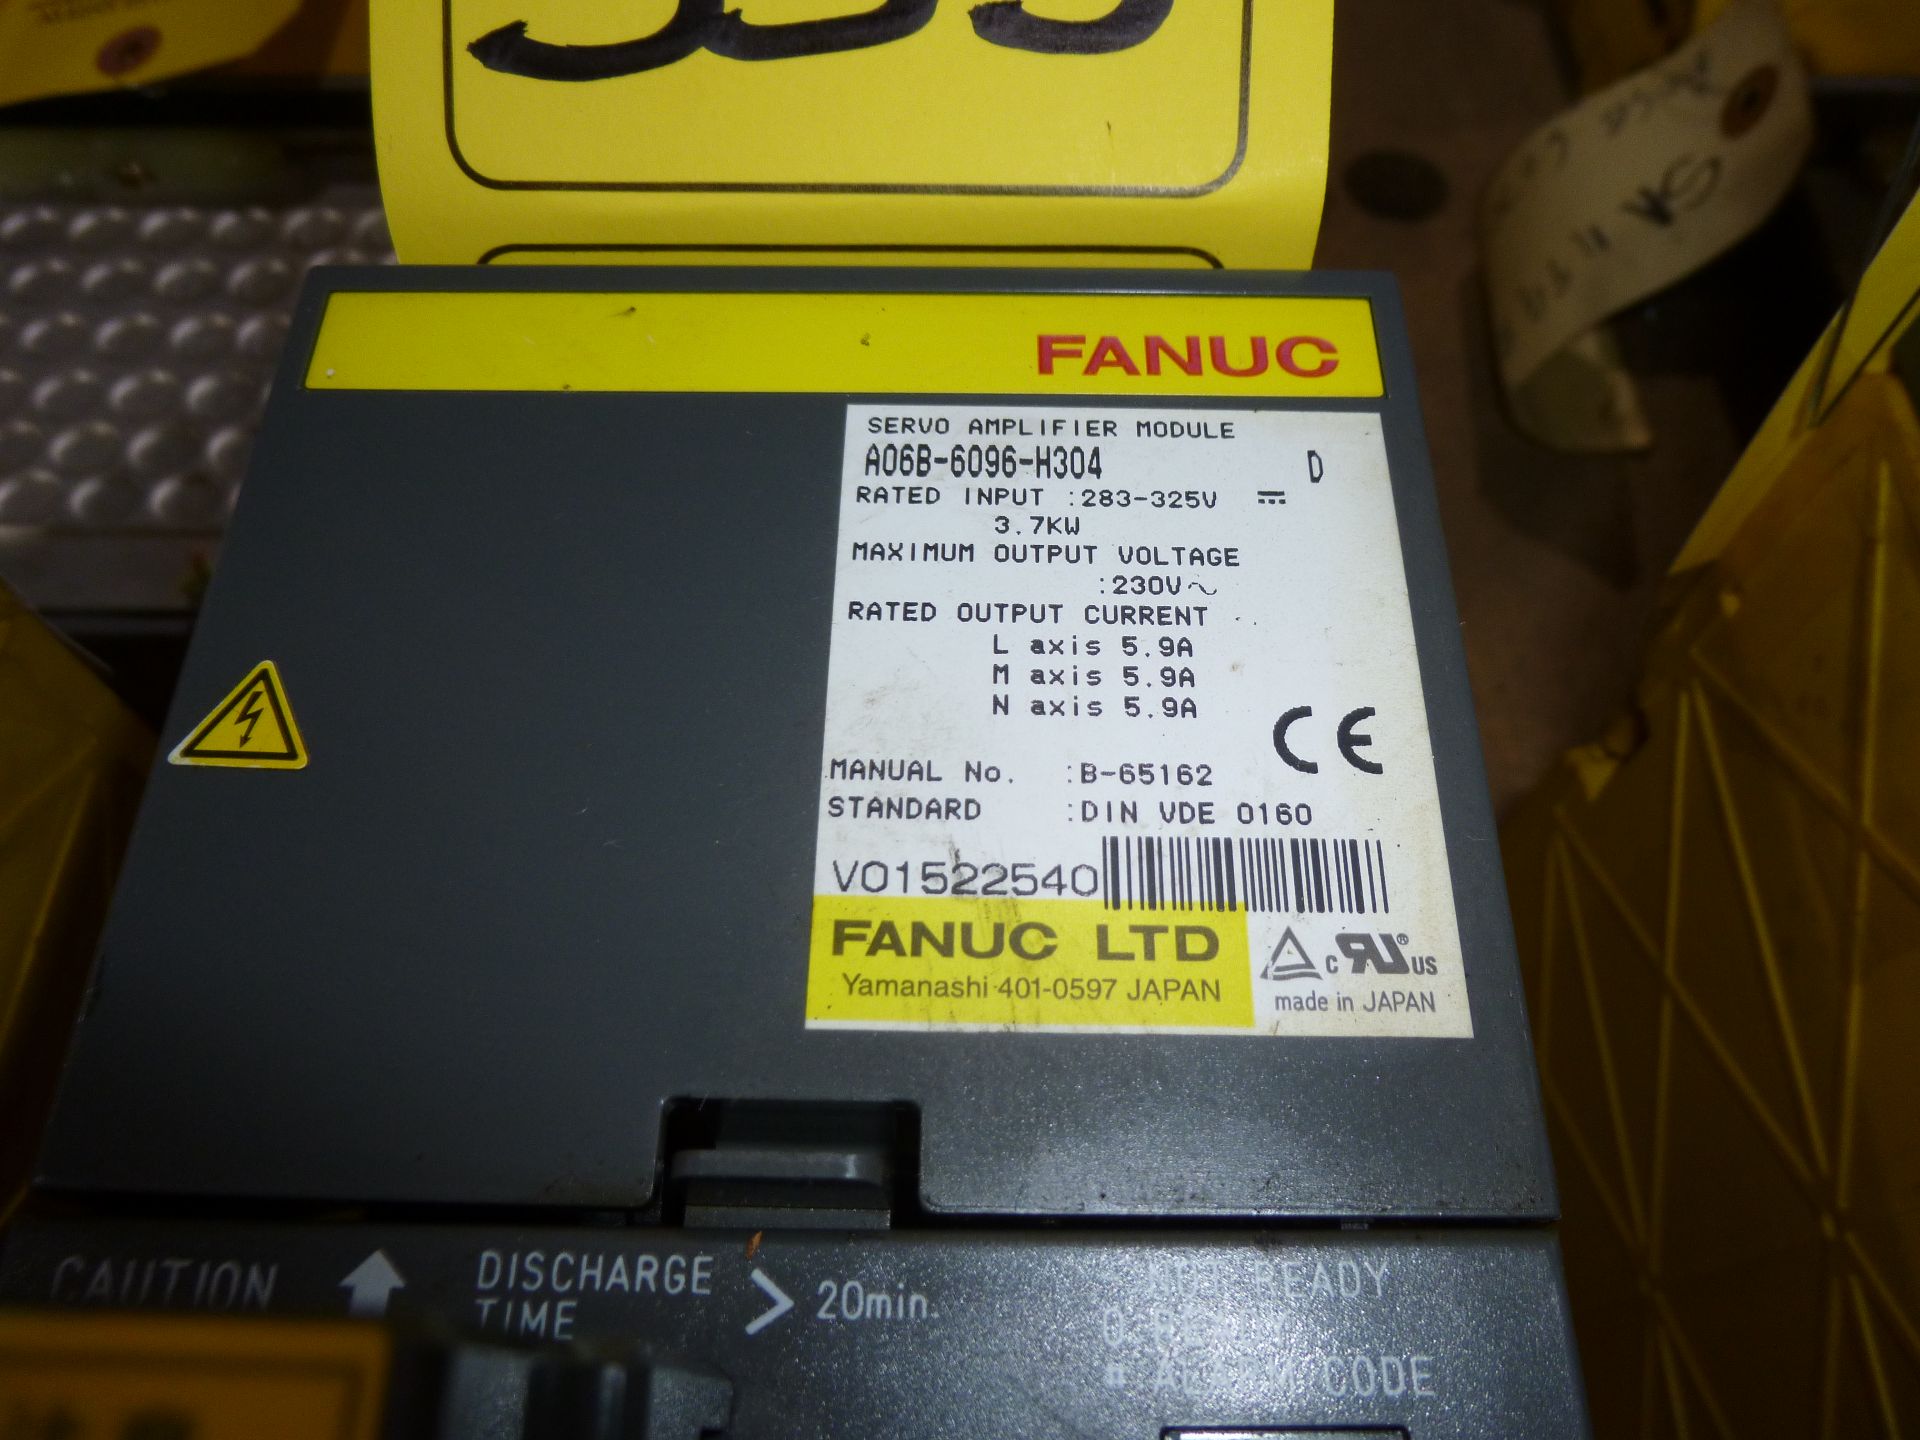 Fanuc servo amplifier module model A06B-6096-H304, as always with Brolyn LLC auctions, all lots - Image 2 of 2